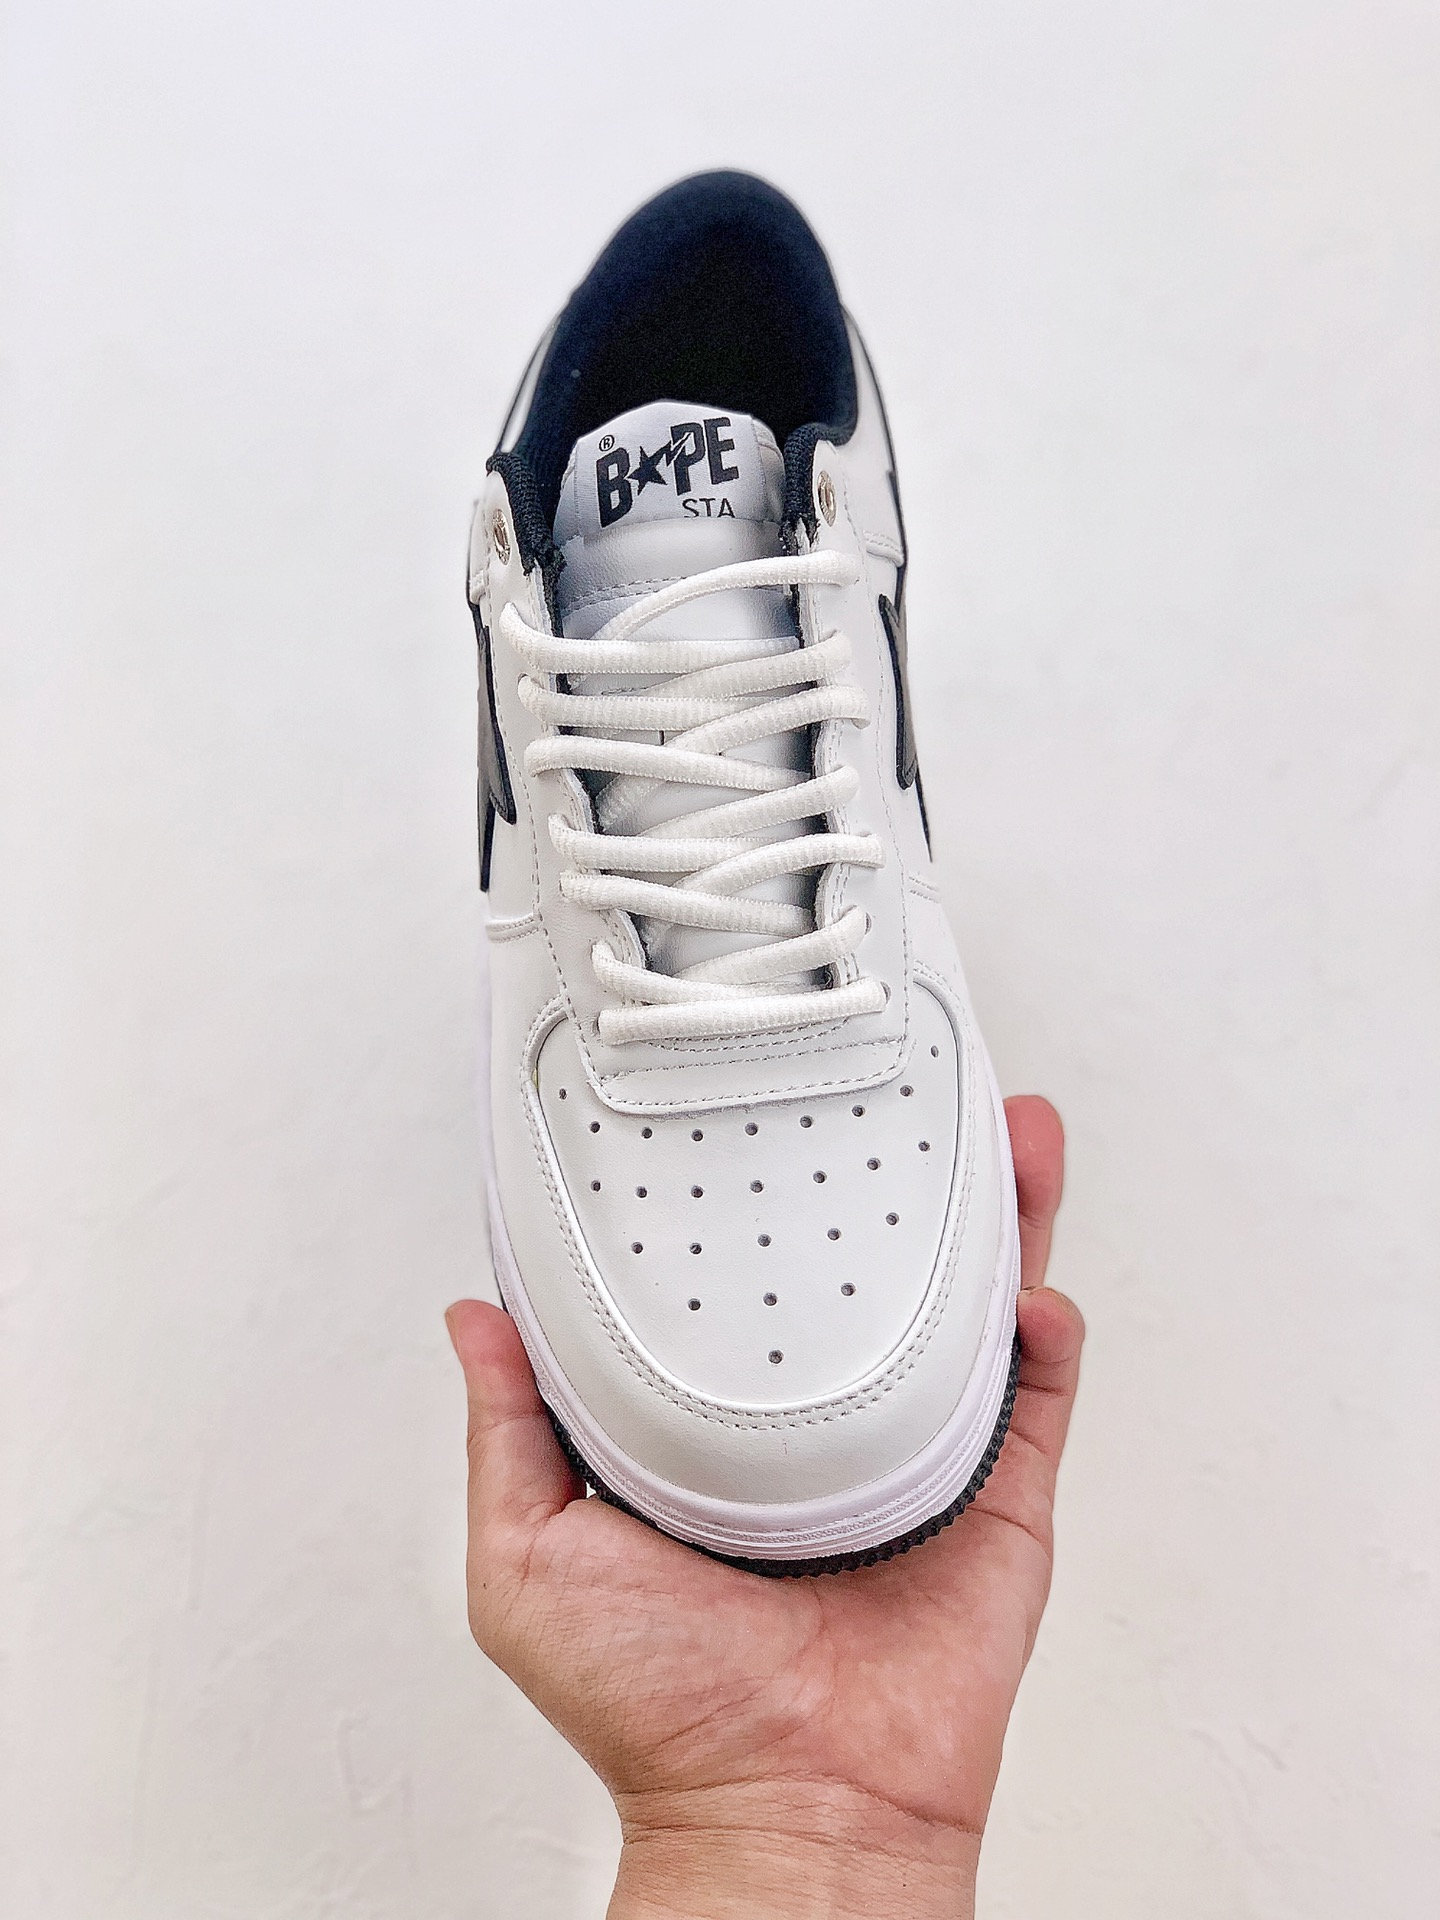 Y2K BapeSTA White Sneakers for High Quality Streetwear